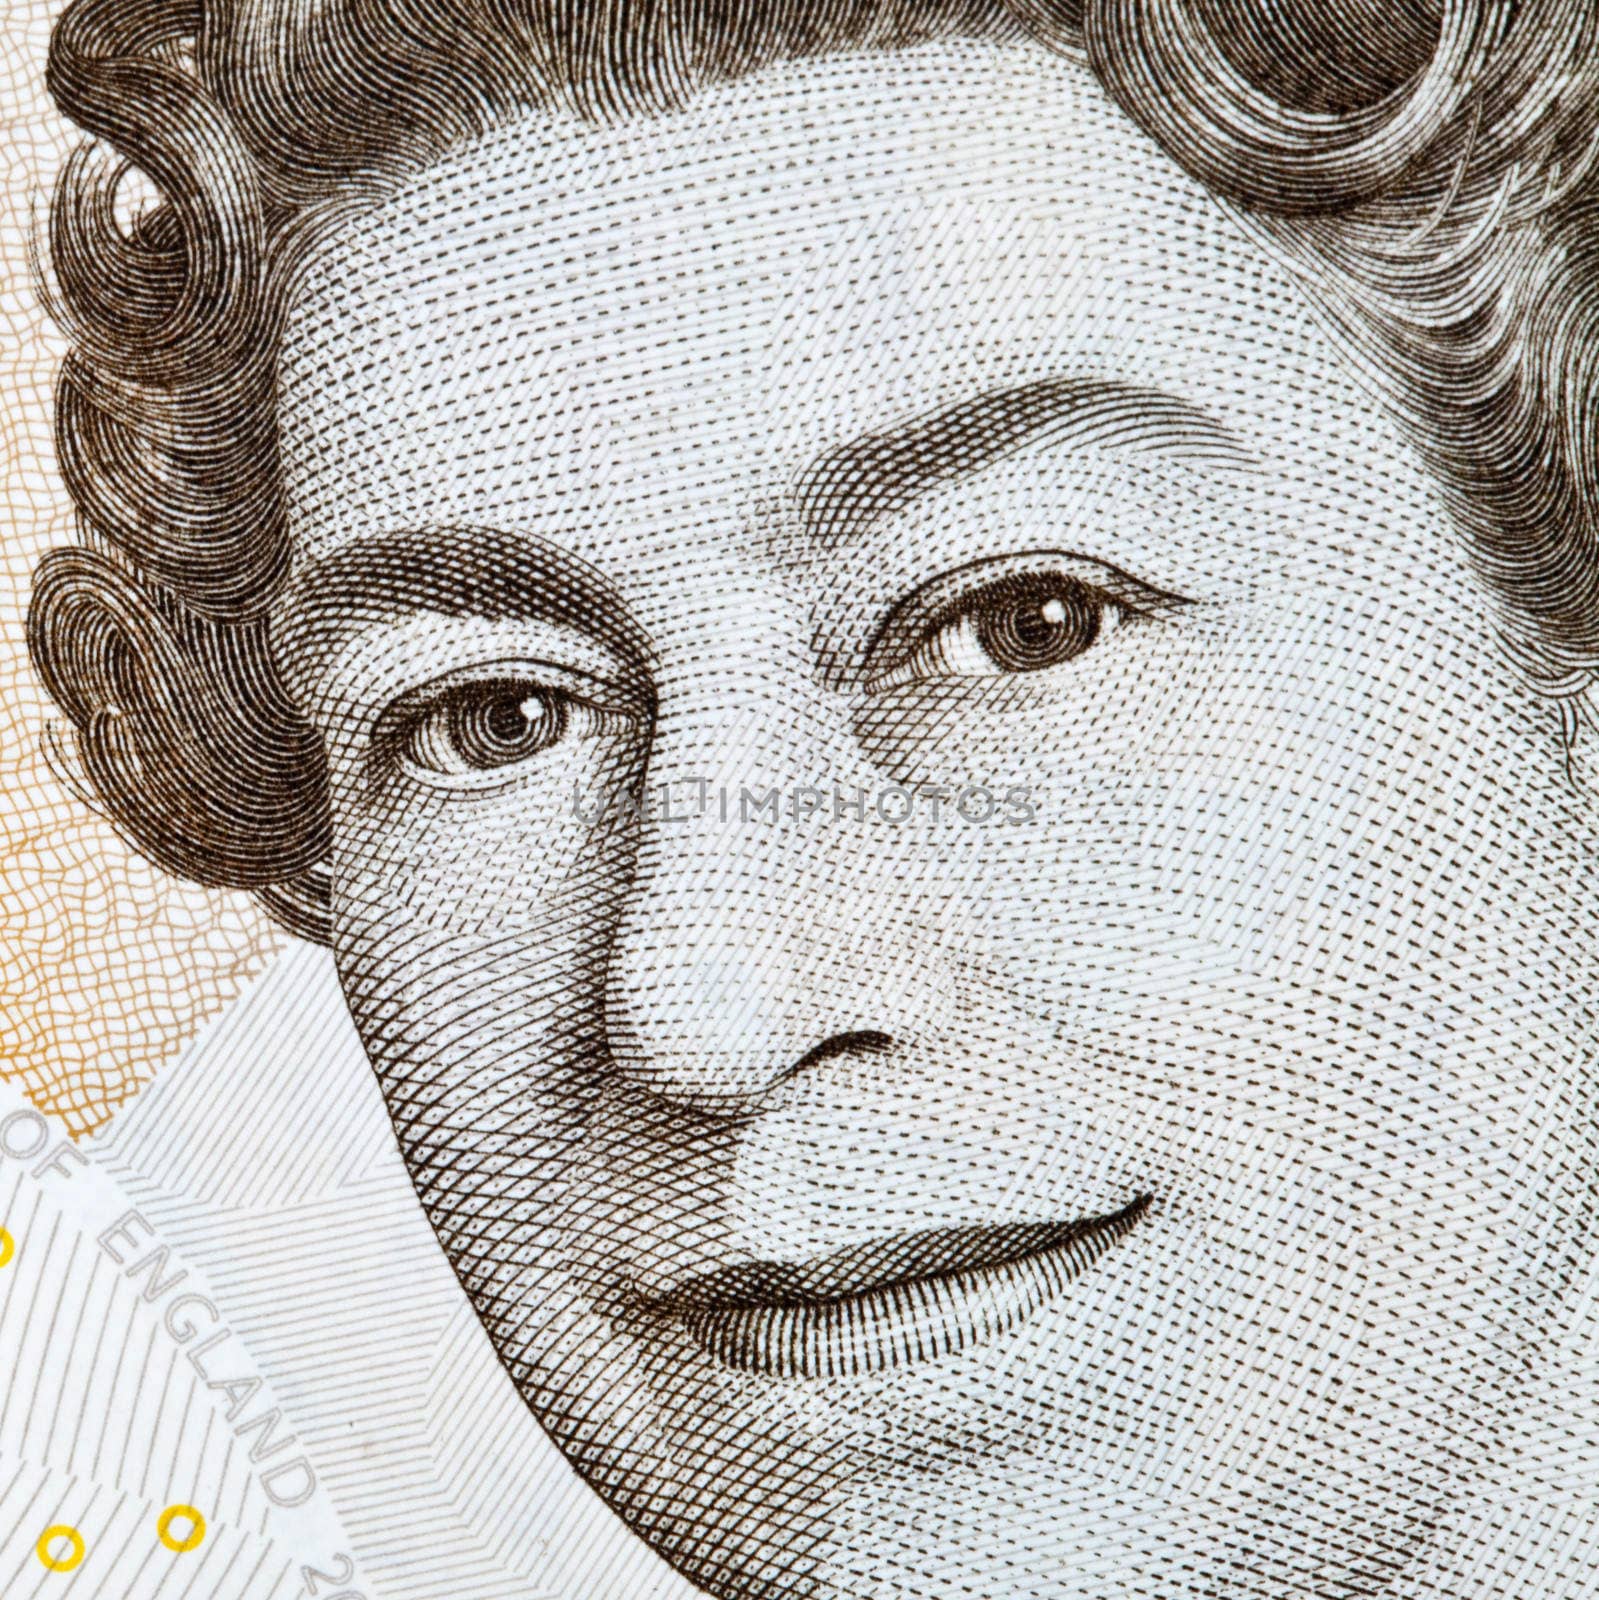 Close-up of the Queen on an English Banknote.